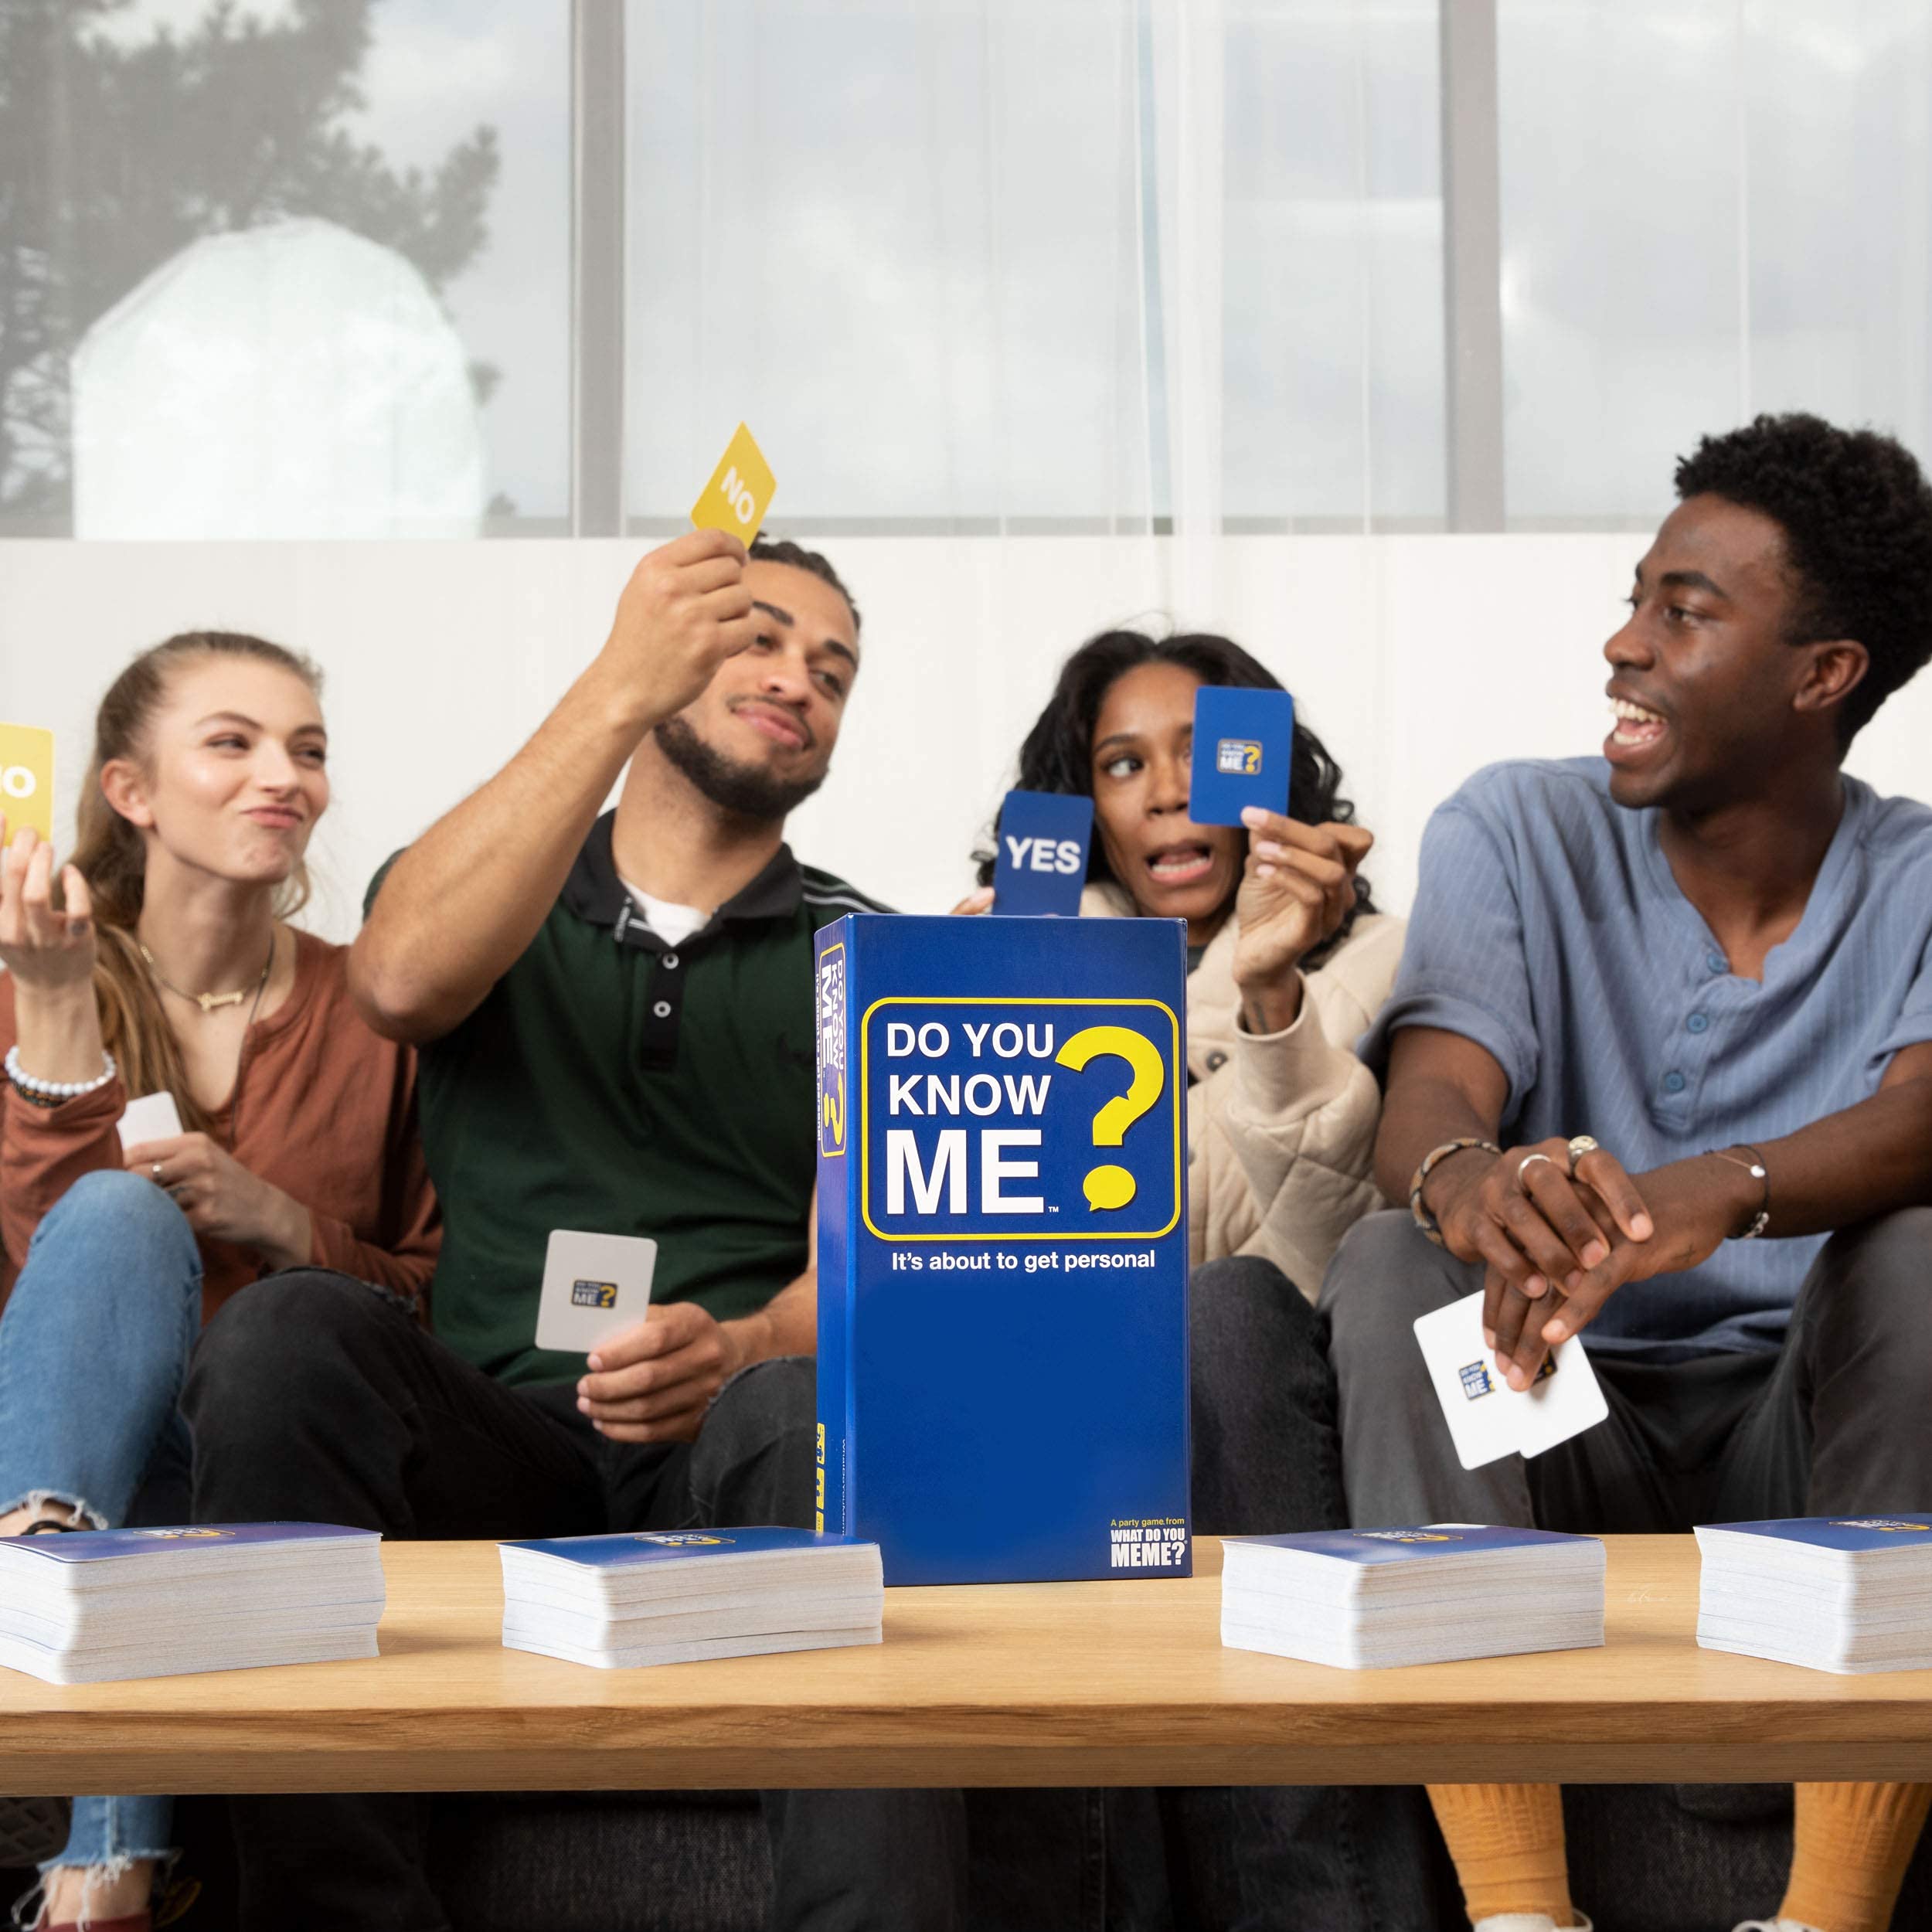 WHAT DO YOU MEME? Do You Know Me? - The Party Game That Puts You and Your Friends in The Hot Seat